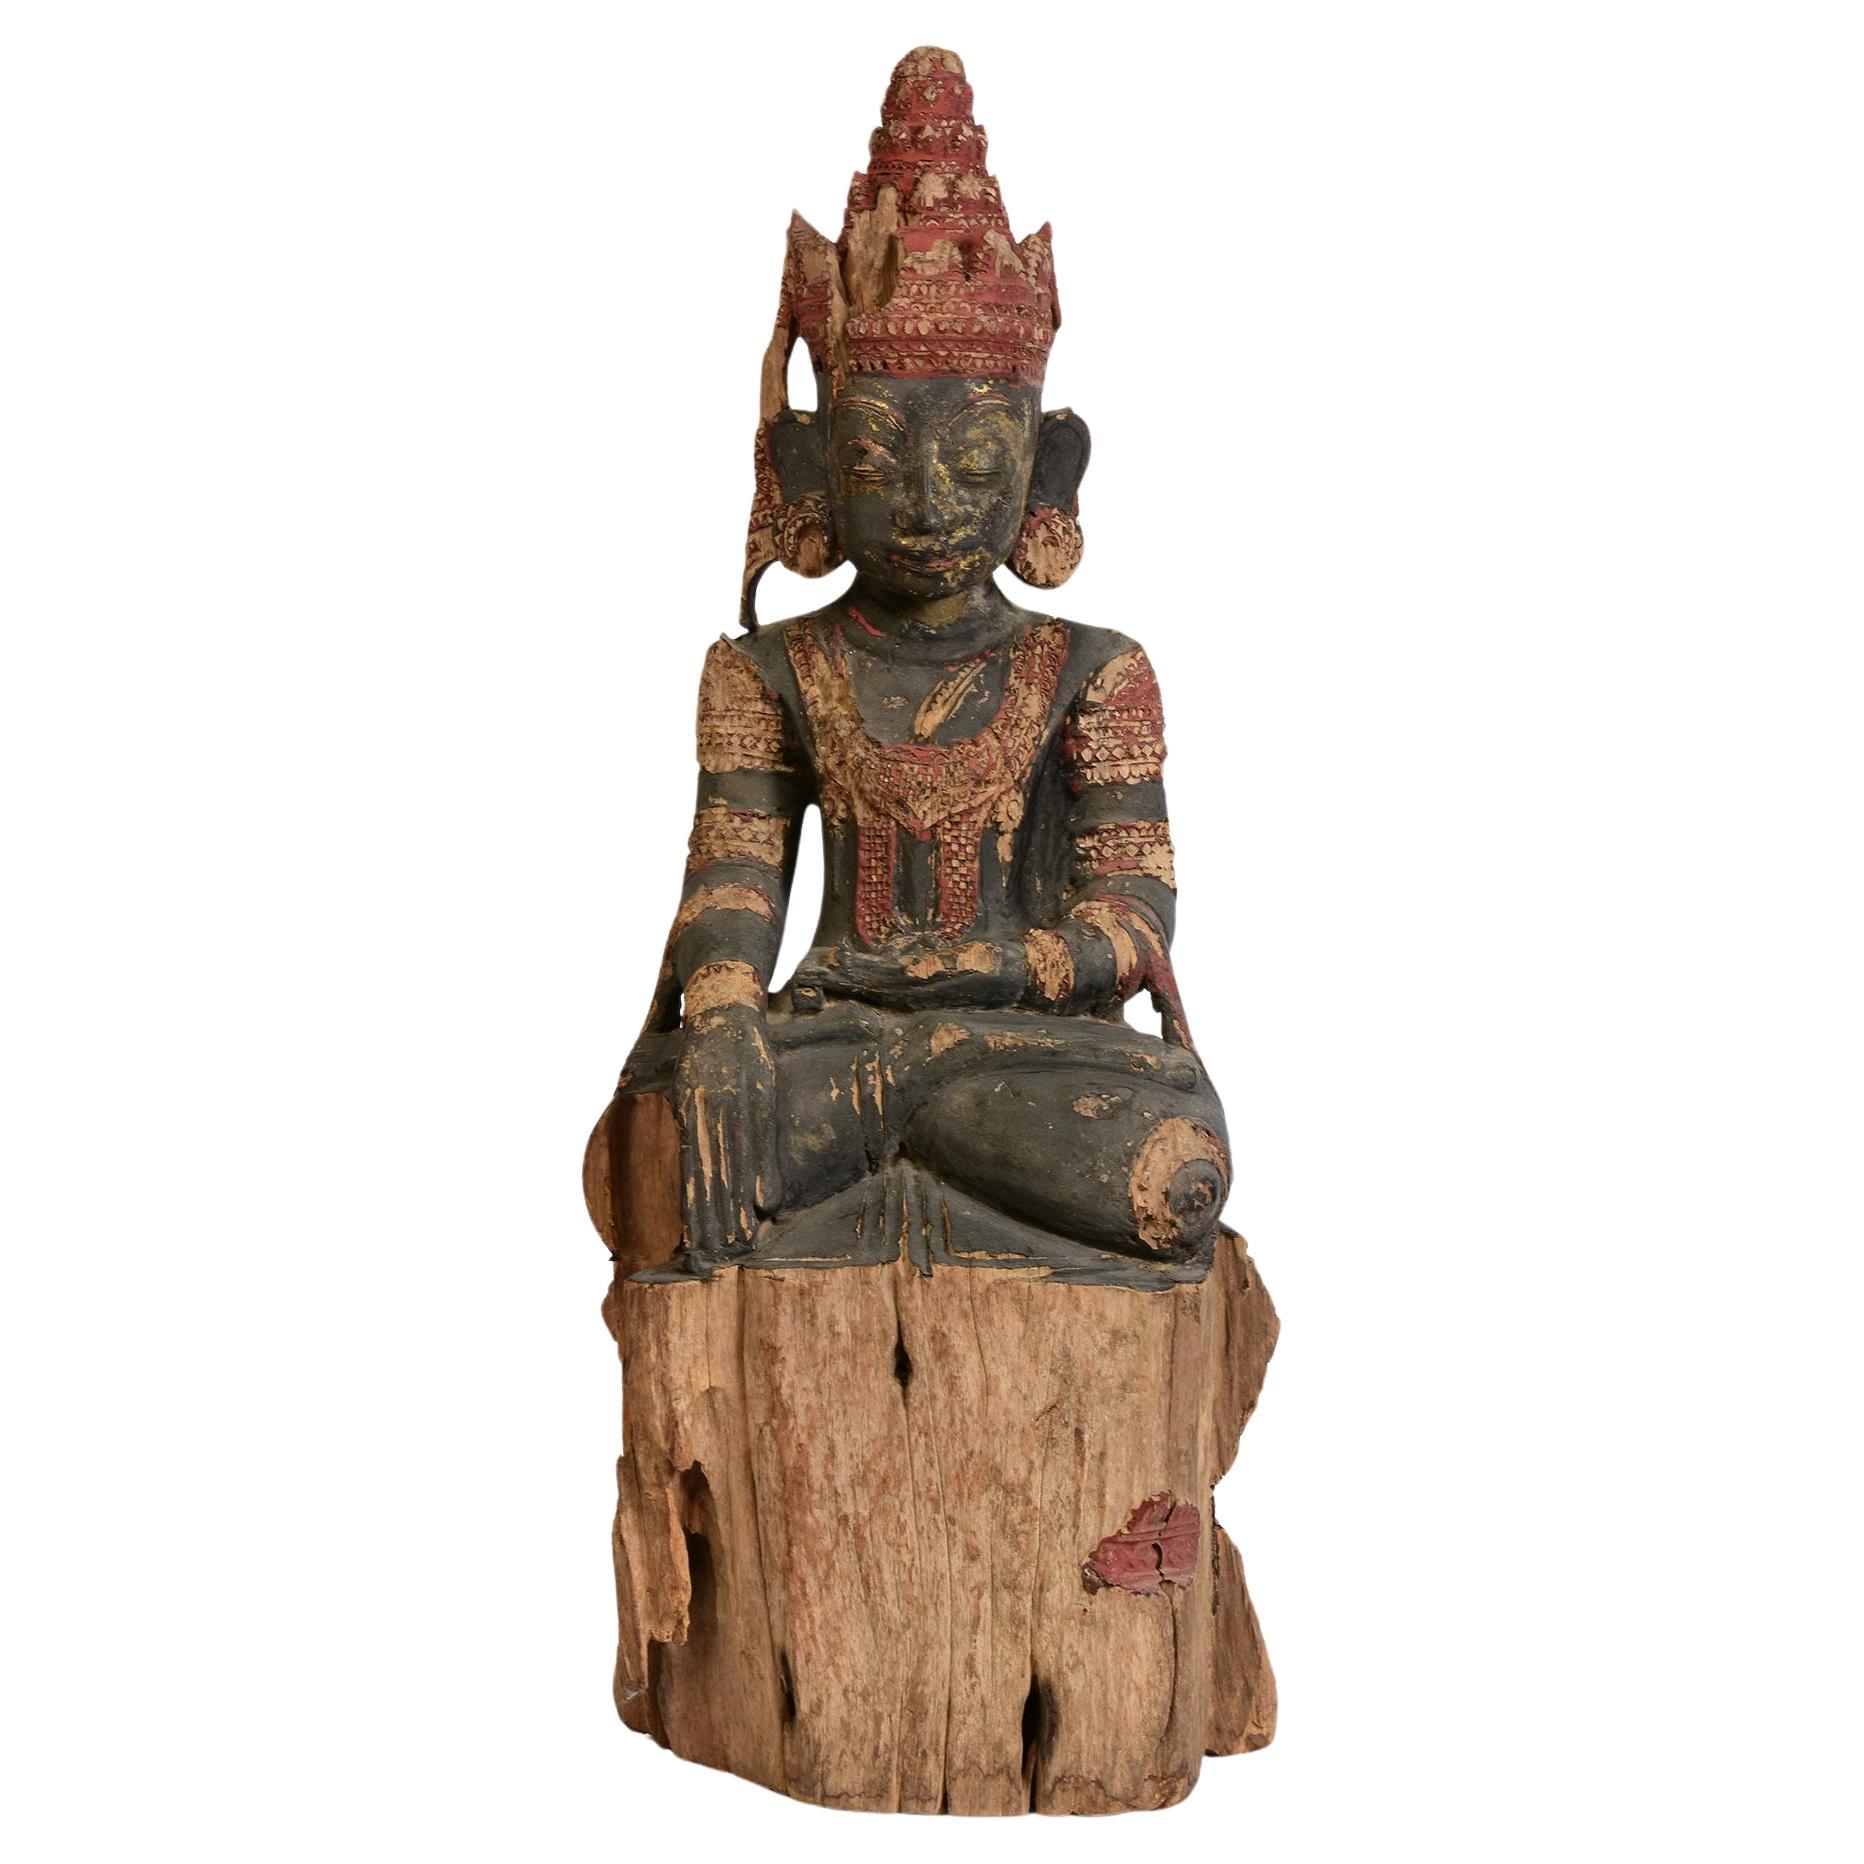 16th Century, Ava, Rare Antique Burmese Wooden Seated Crowned Buddha For Sale